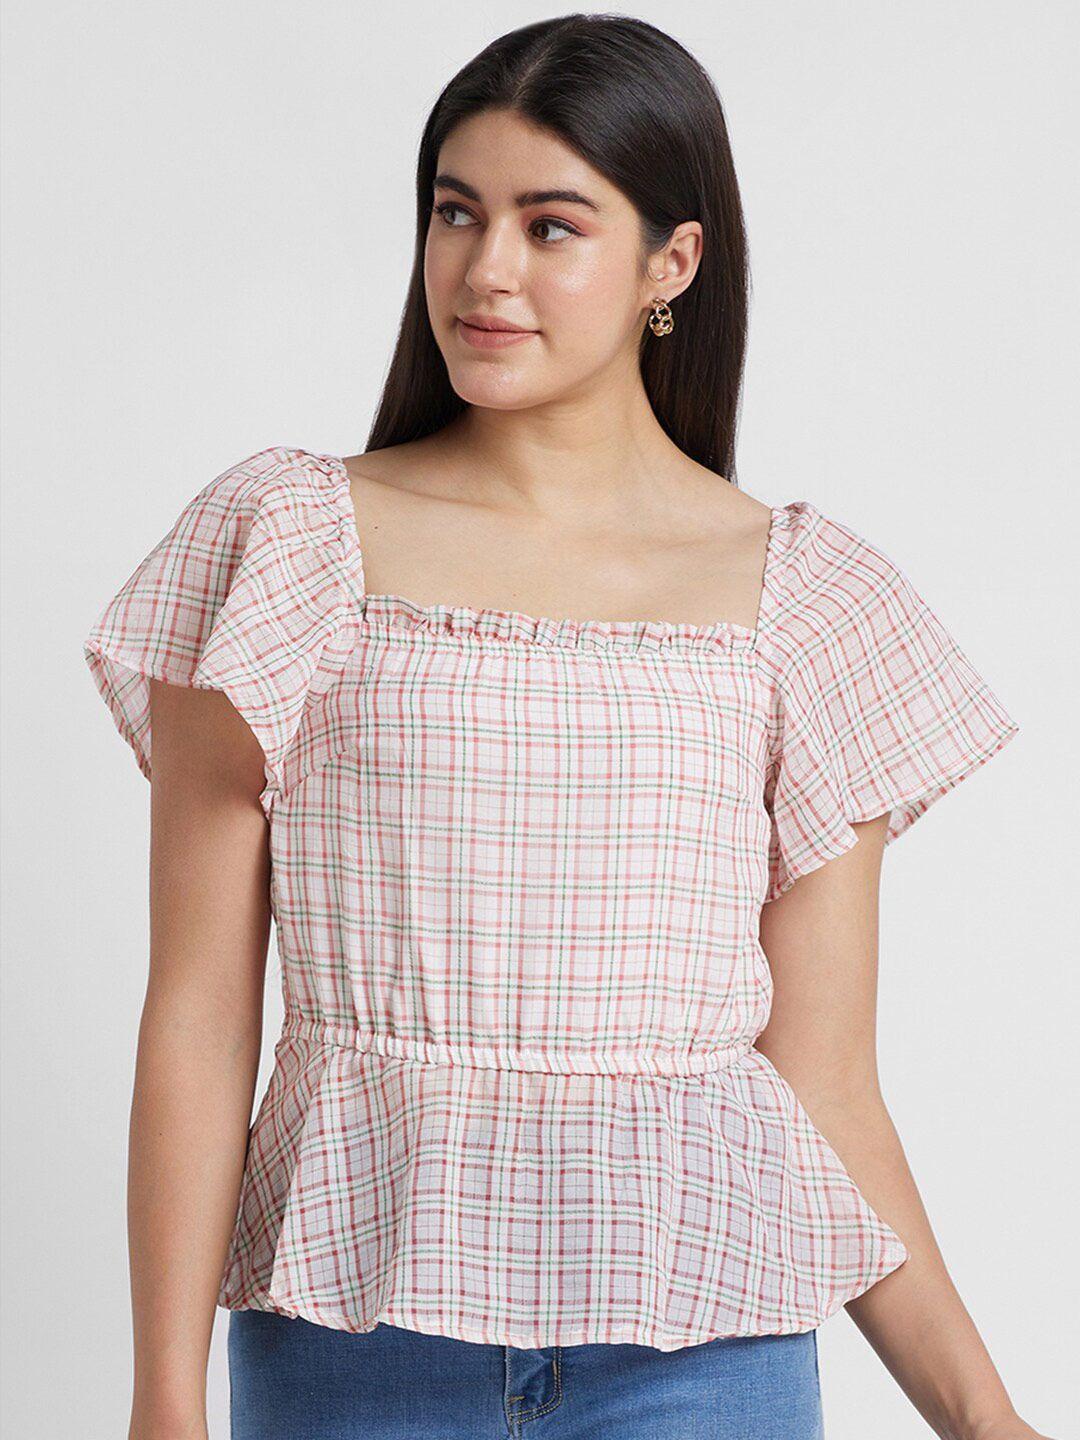 globus checked square neck flared sleeves peplum top